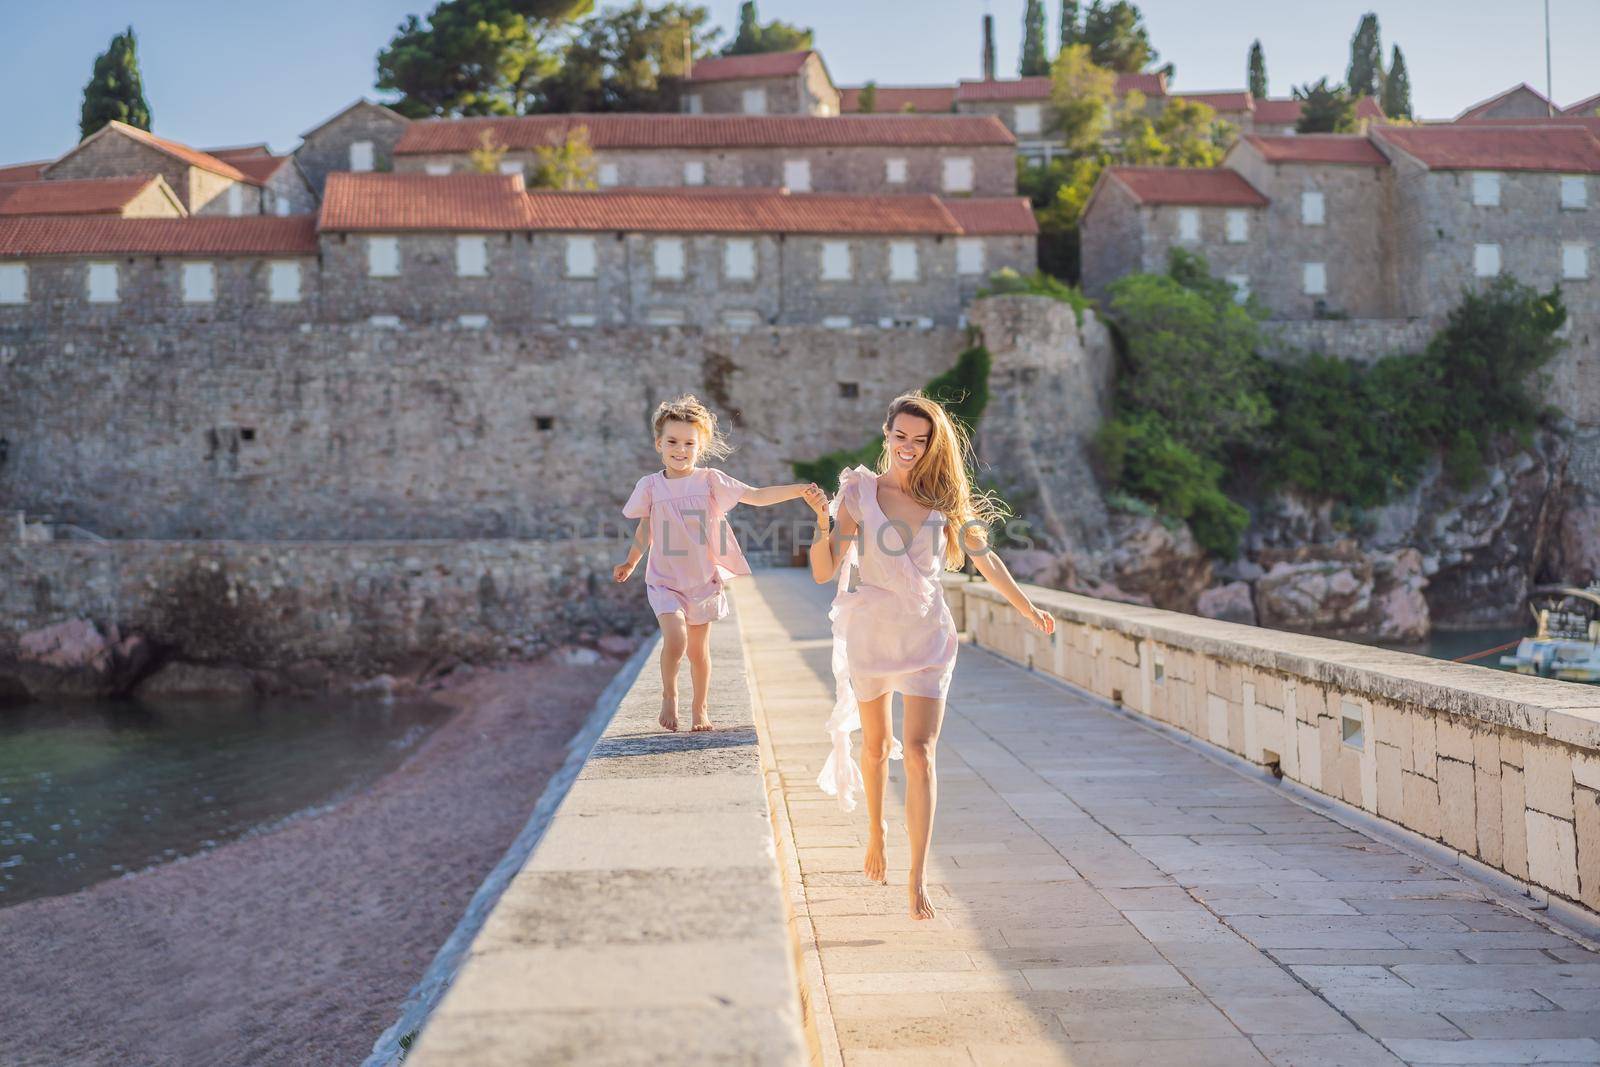 Mother and daughter tourists on background of beautiful view St. Stephen island, Sveti Stefan on the Budva Riviera, Budva, Montenegro. Travel to Montenegro concept.